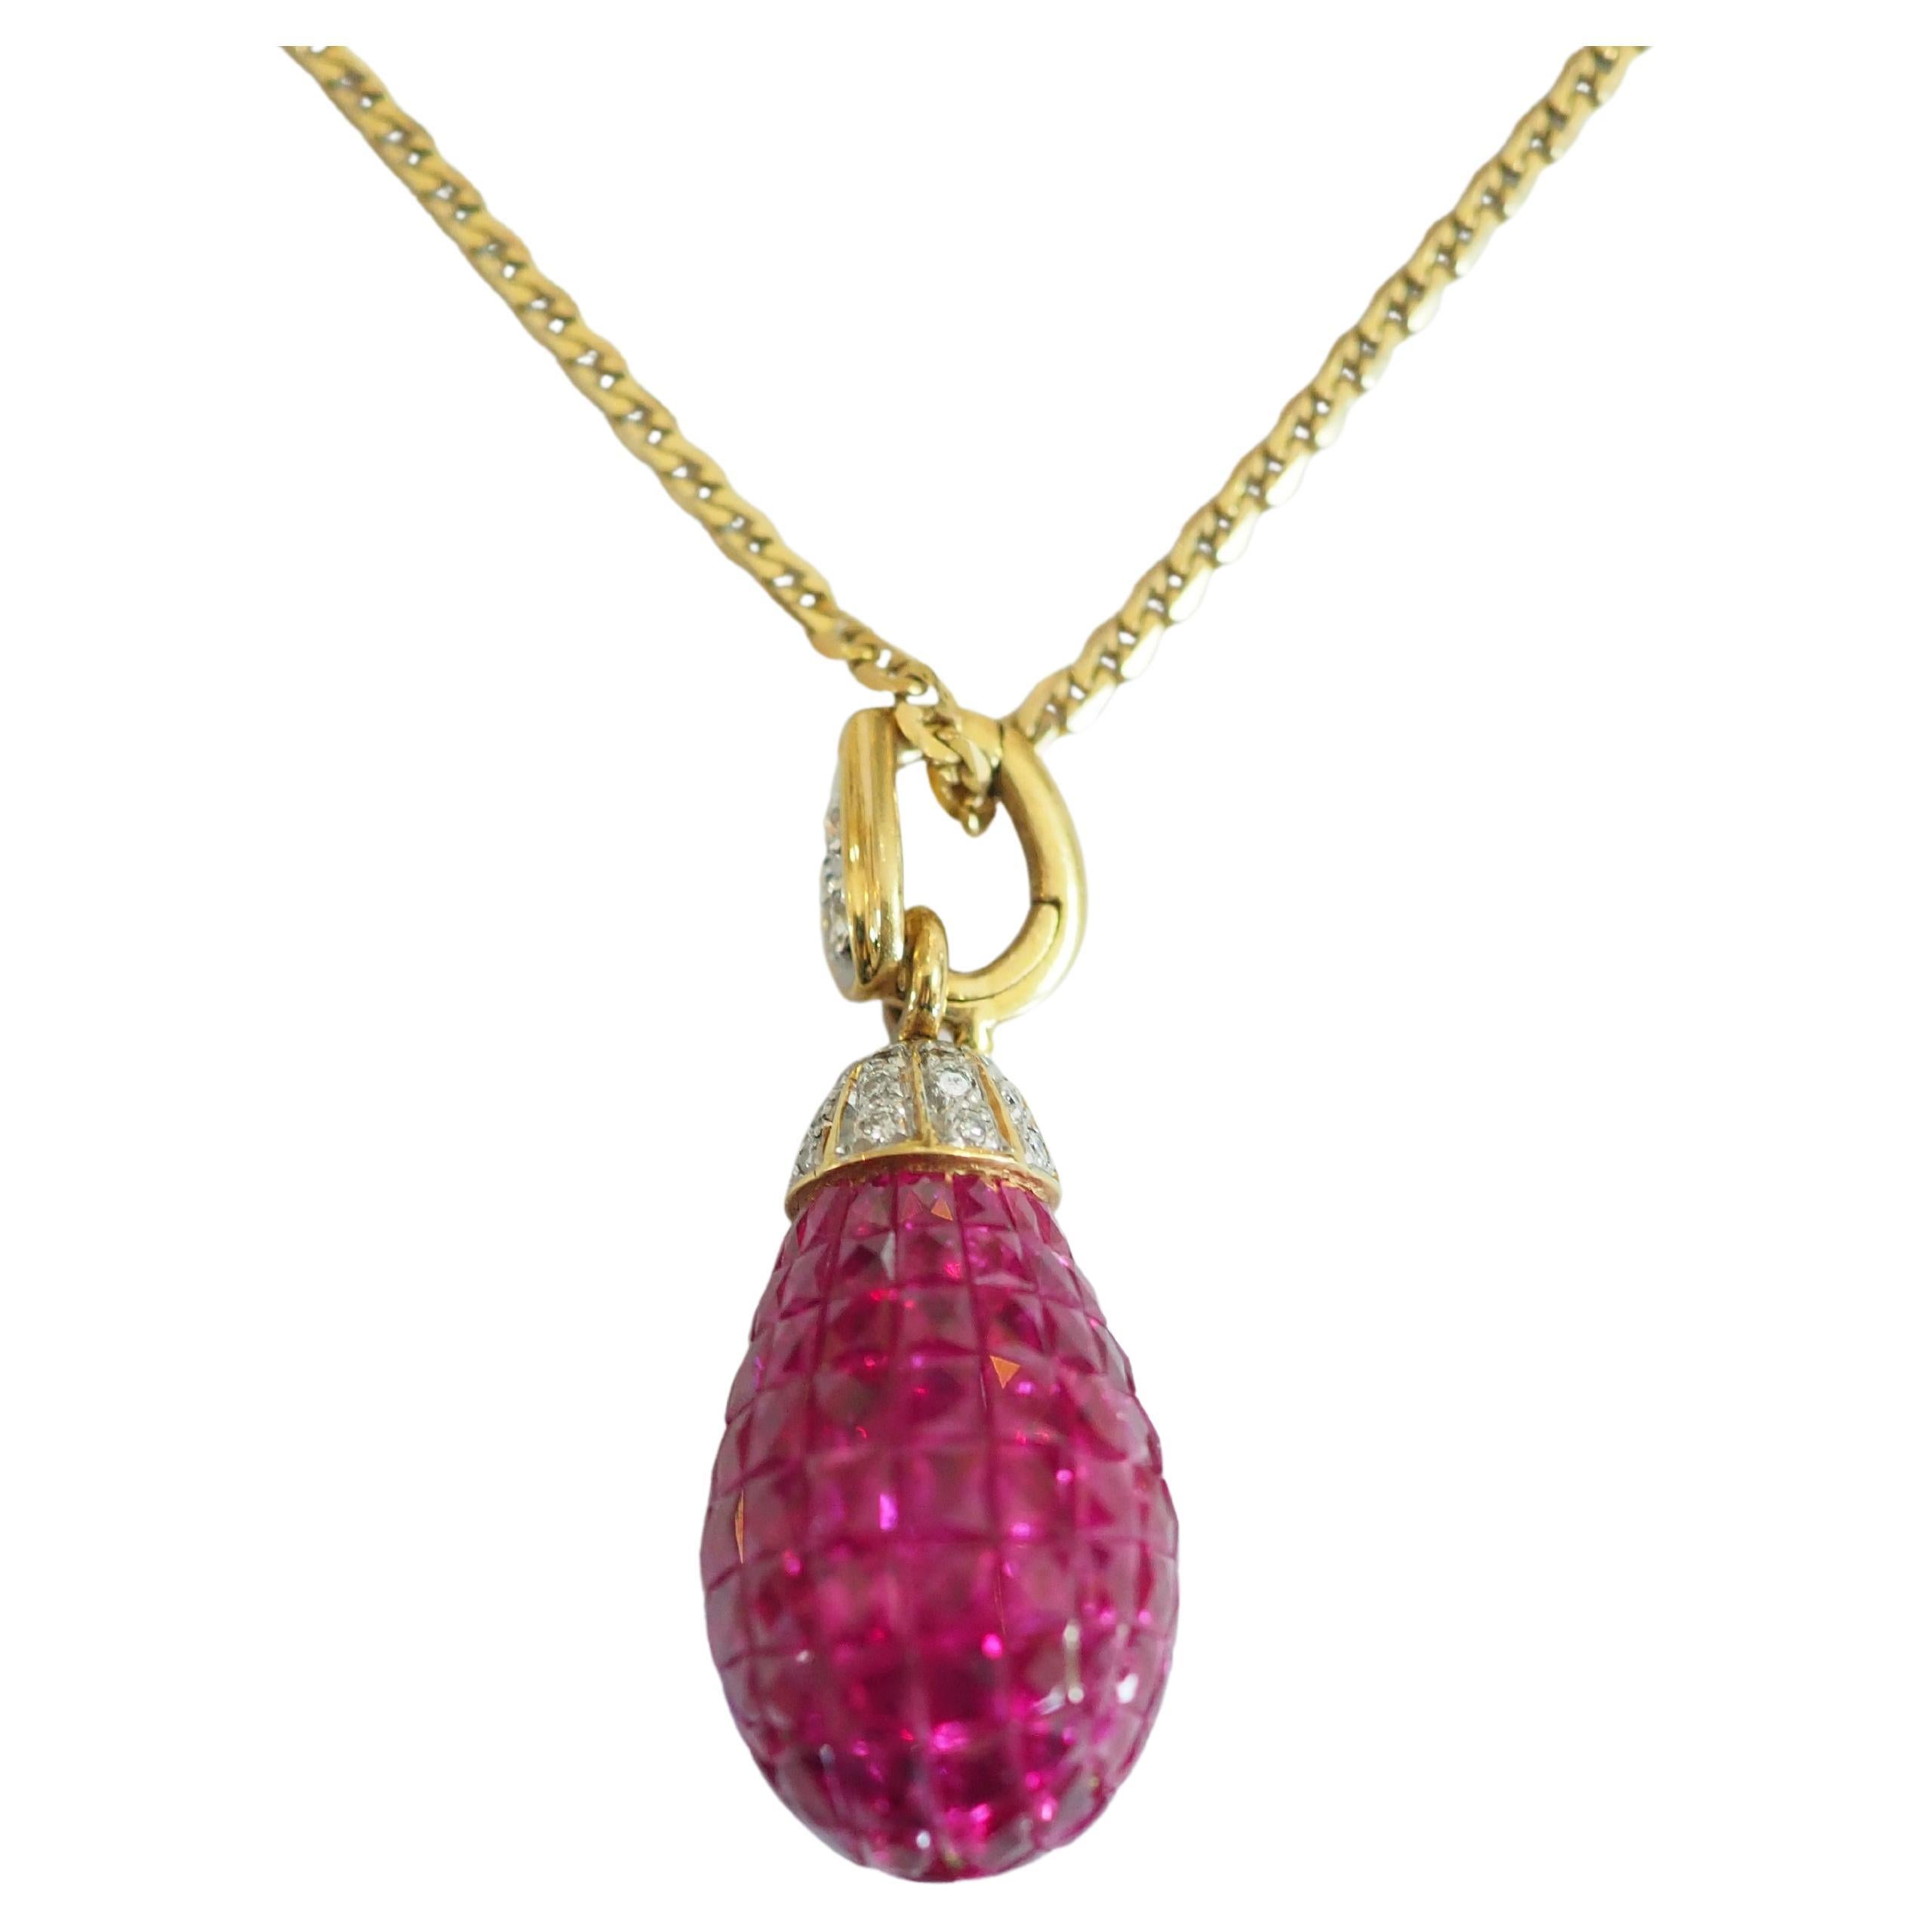 18k Gold Faberge Ruby & Diamond Pear Shaped Cluster Pendant Necklace + Chain